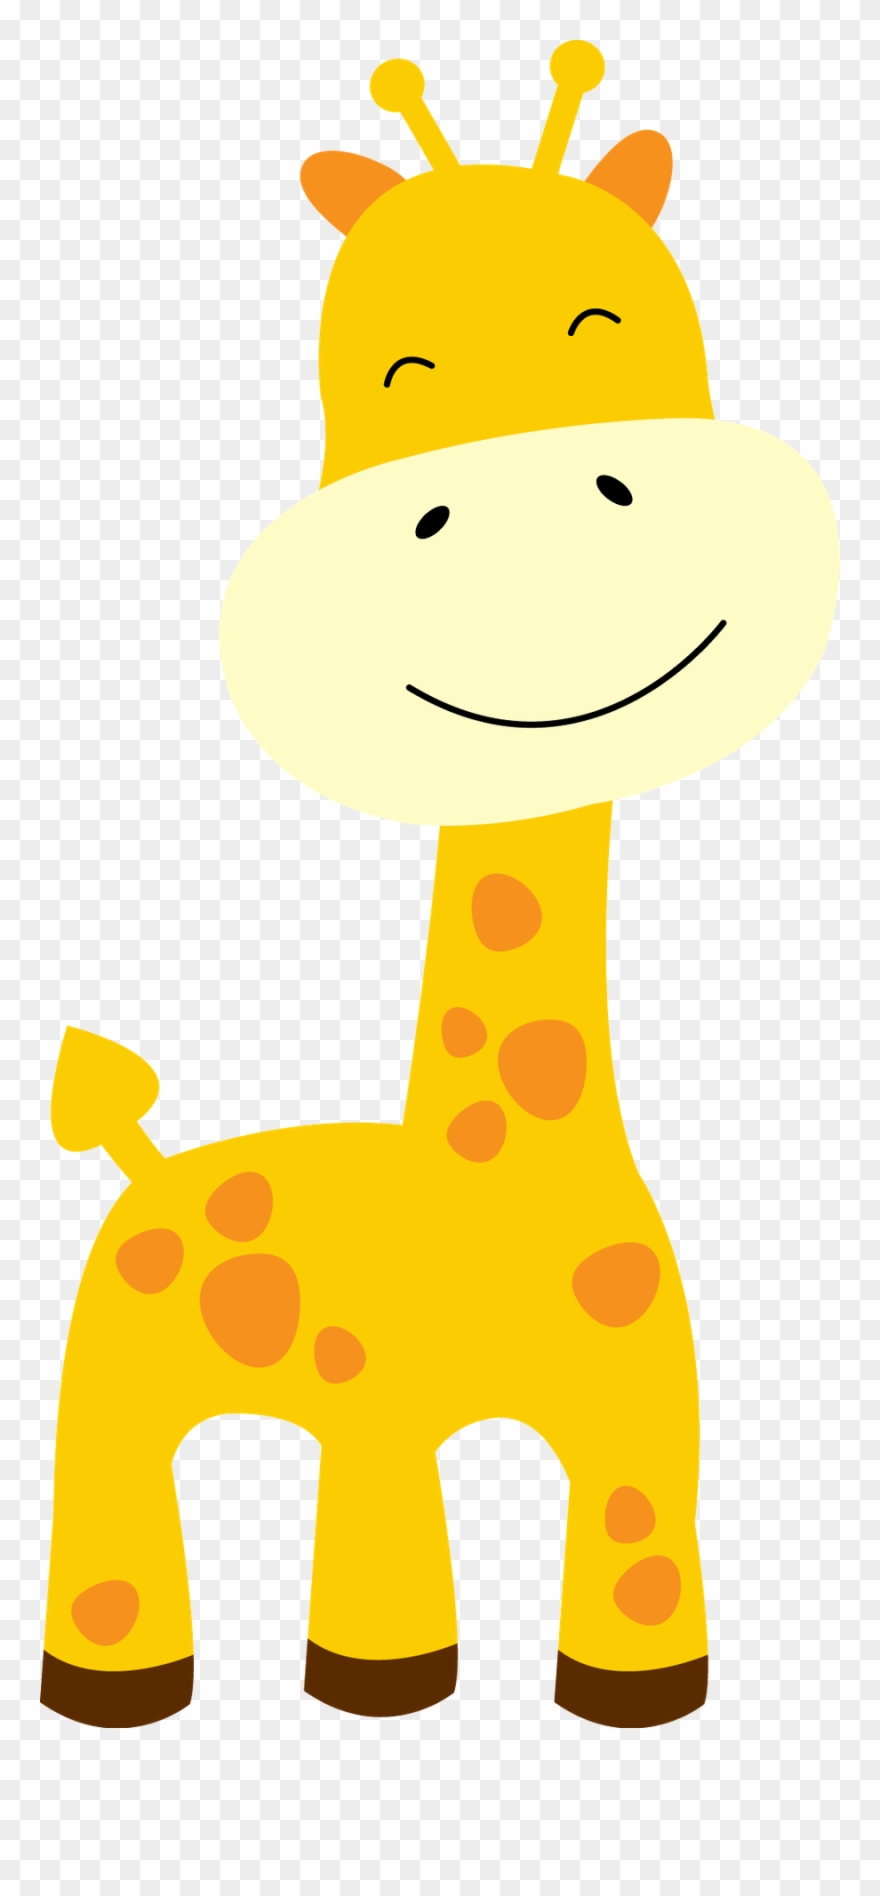 Baby giraffe clipart FREE COMMERCIAL use baby kid clipart png safari jungle  animal clipart nursery art yellow watercolor giraffe PNG Materials Card  Making & Stationery 